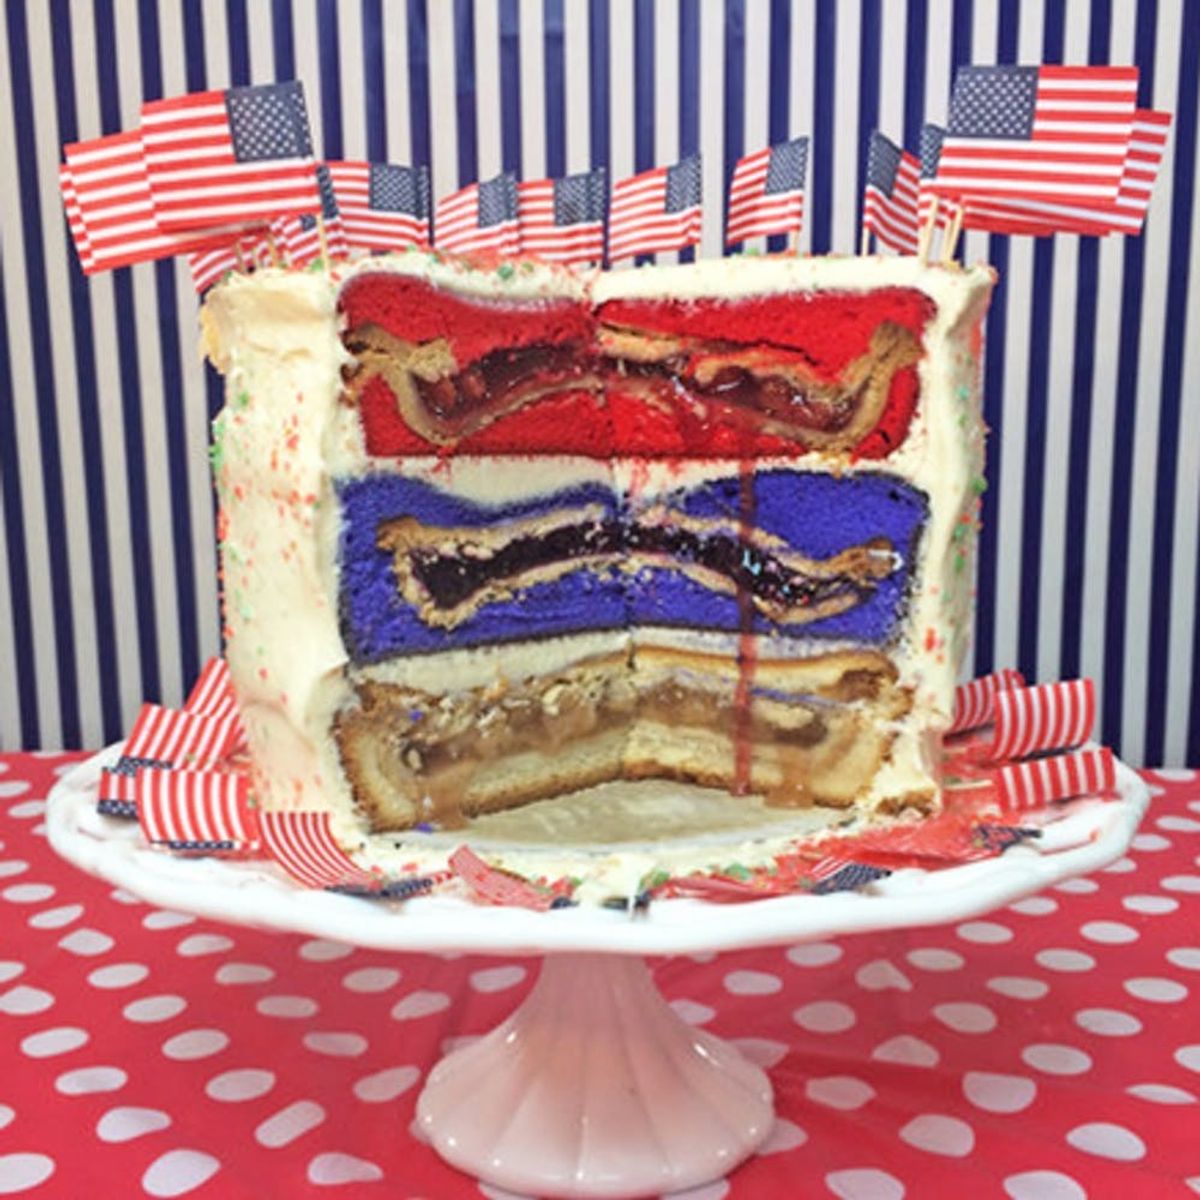 This FrankenPie May Be the Craziest, Most American Dessert Ever